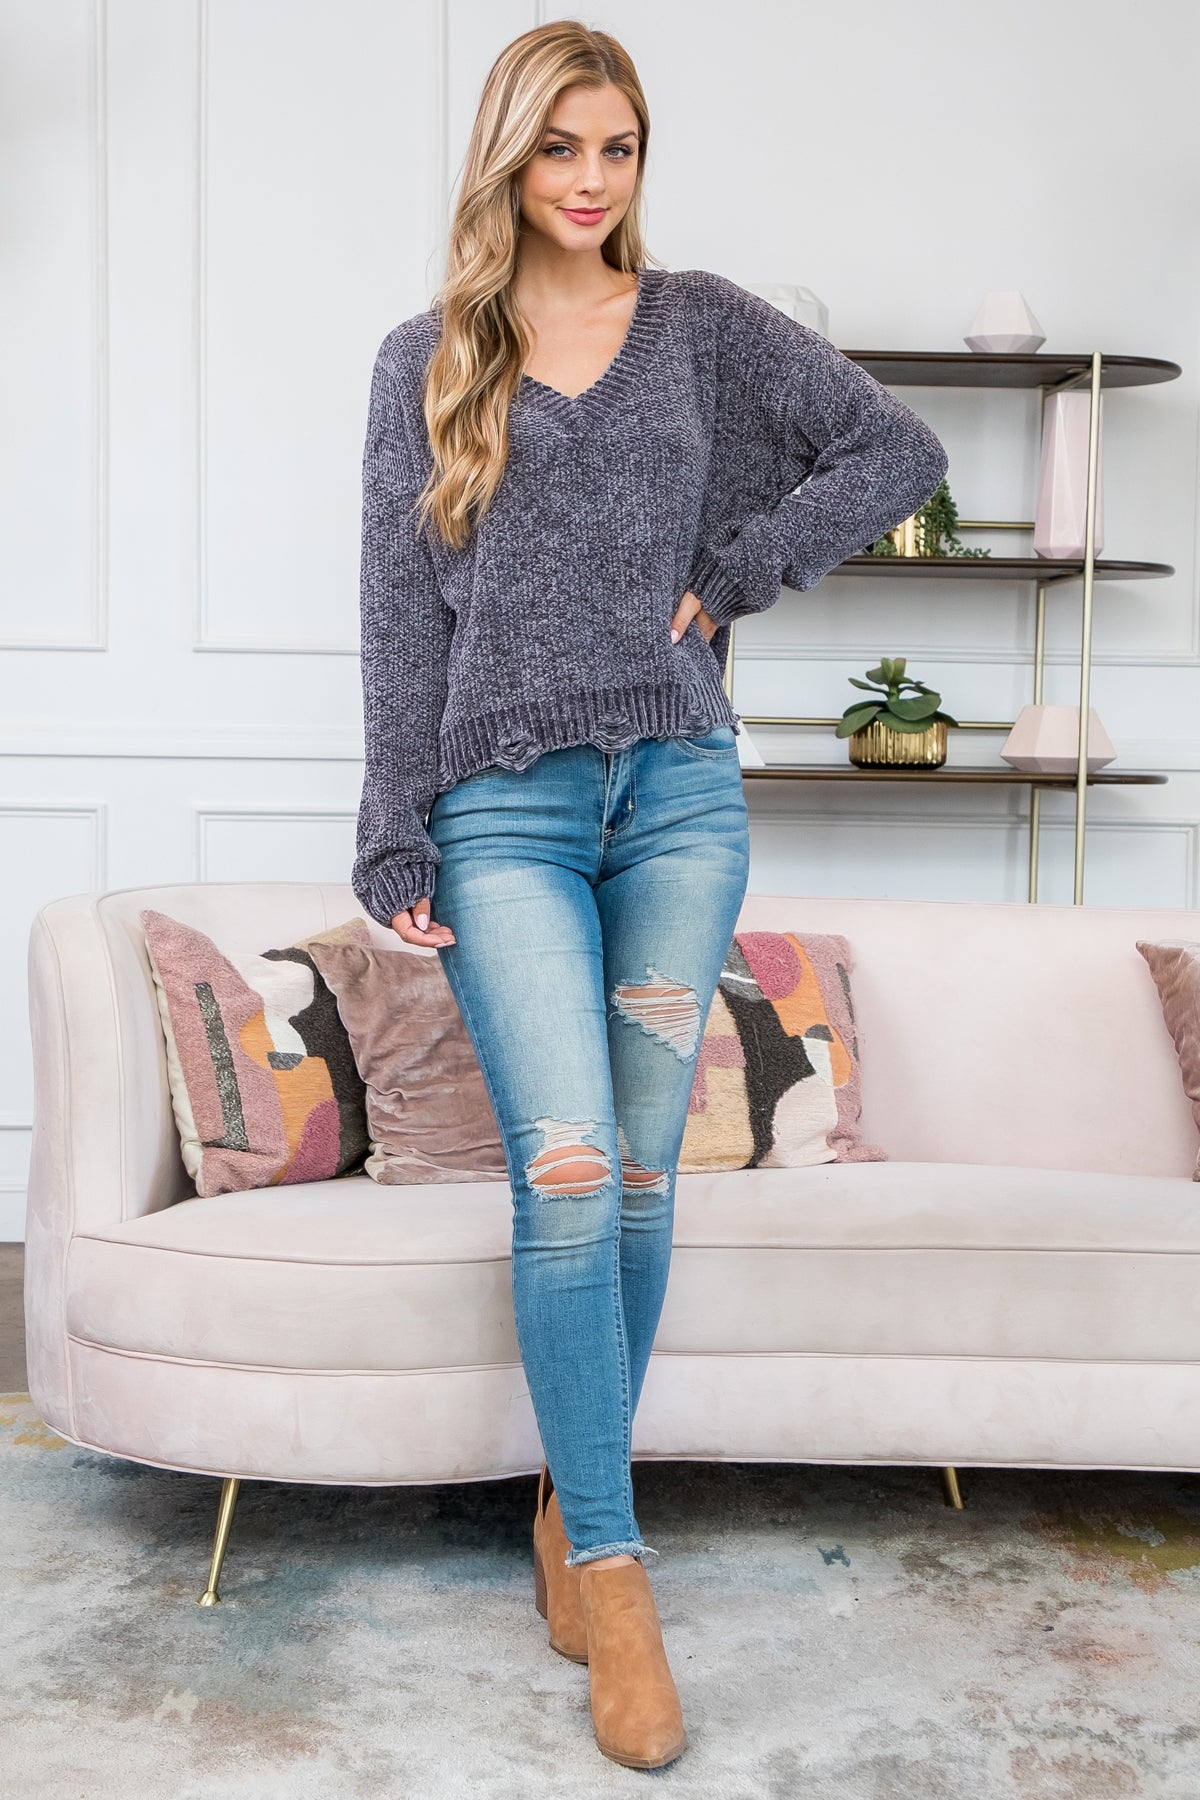 '-CHARCOAL V-NECK LONG SLEEVE KNITTED SWEATER (NOW $7.75 ONLY!)